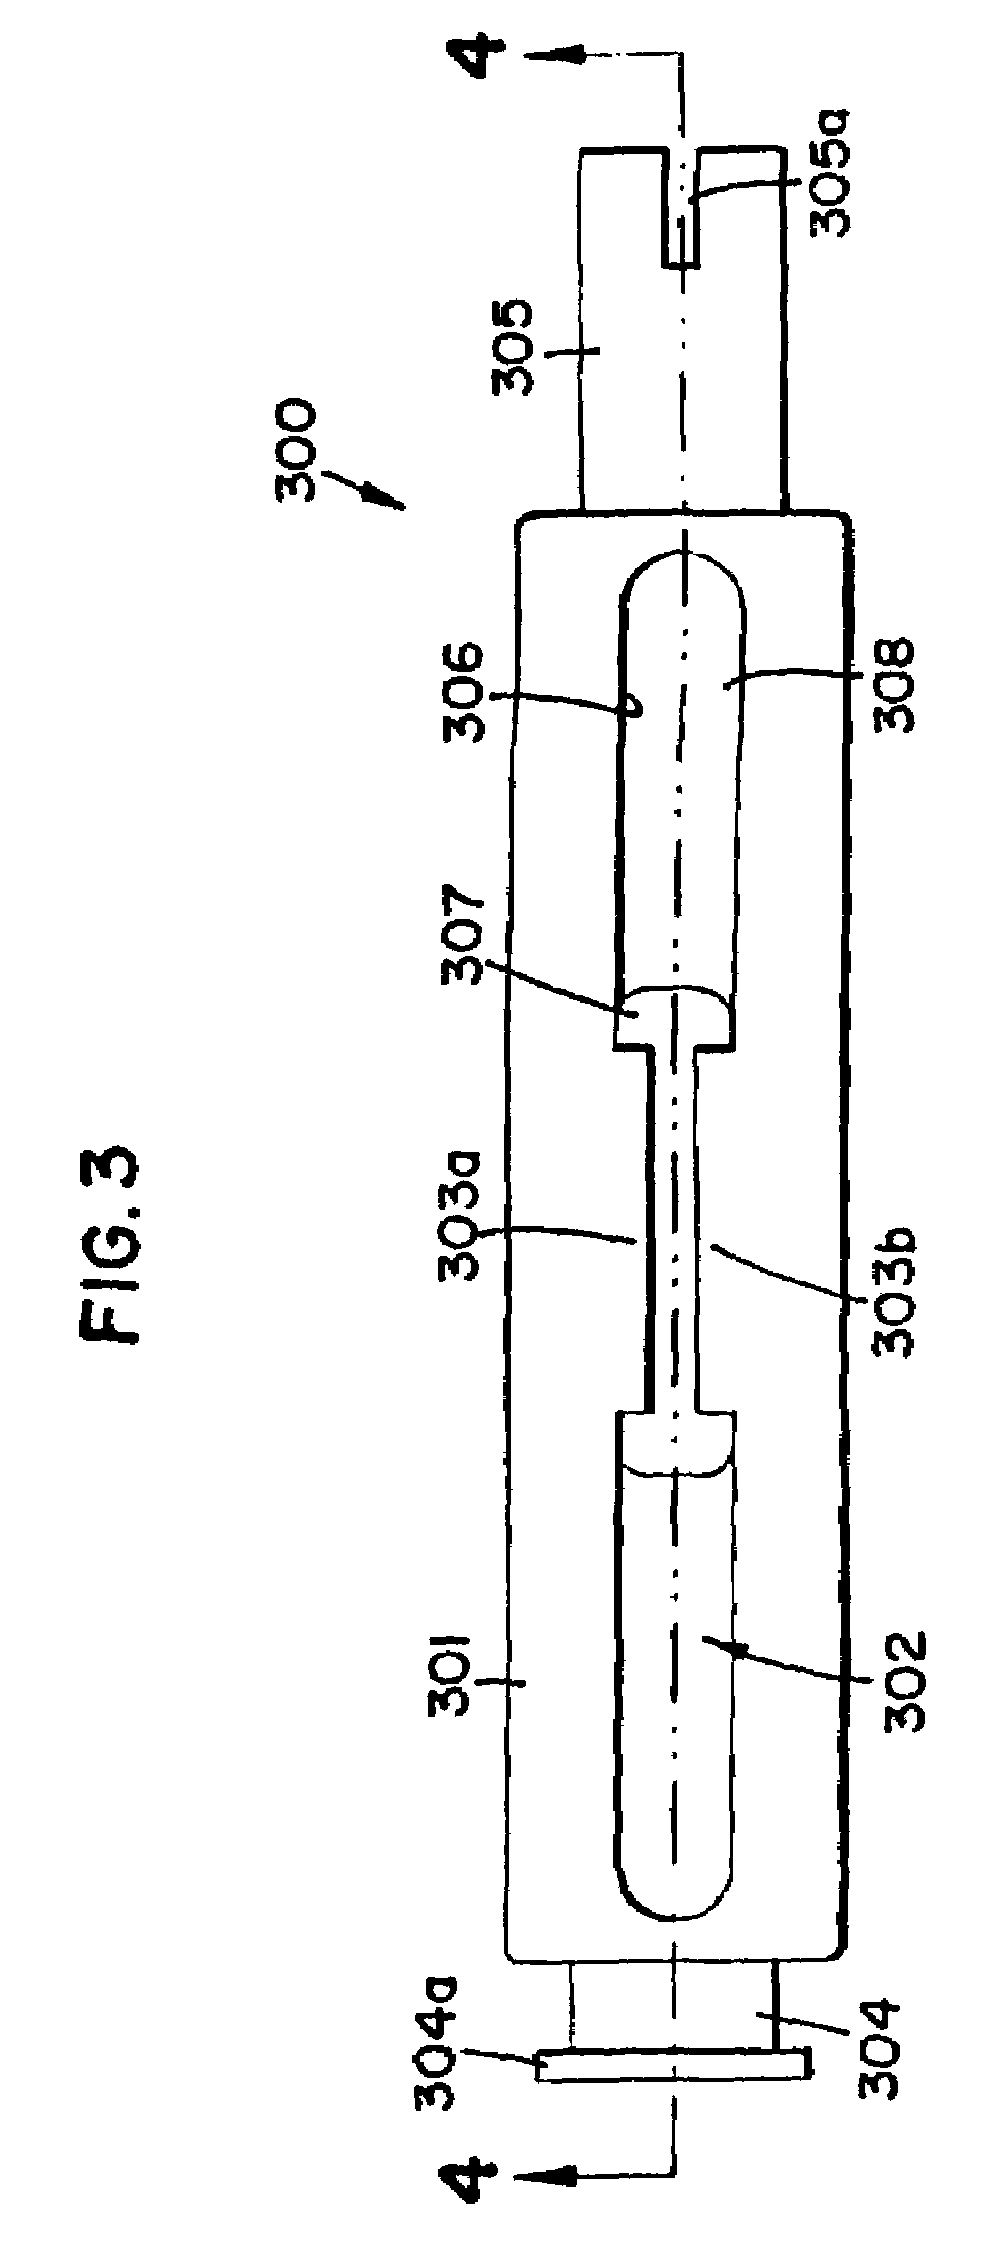 Dorsal pad assembly for use with a safety harness